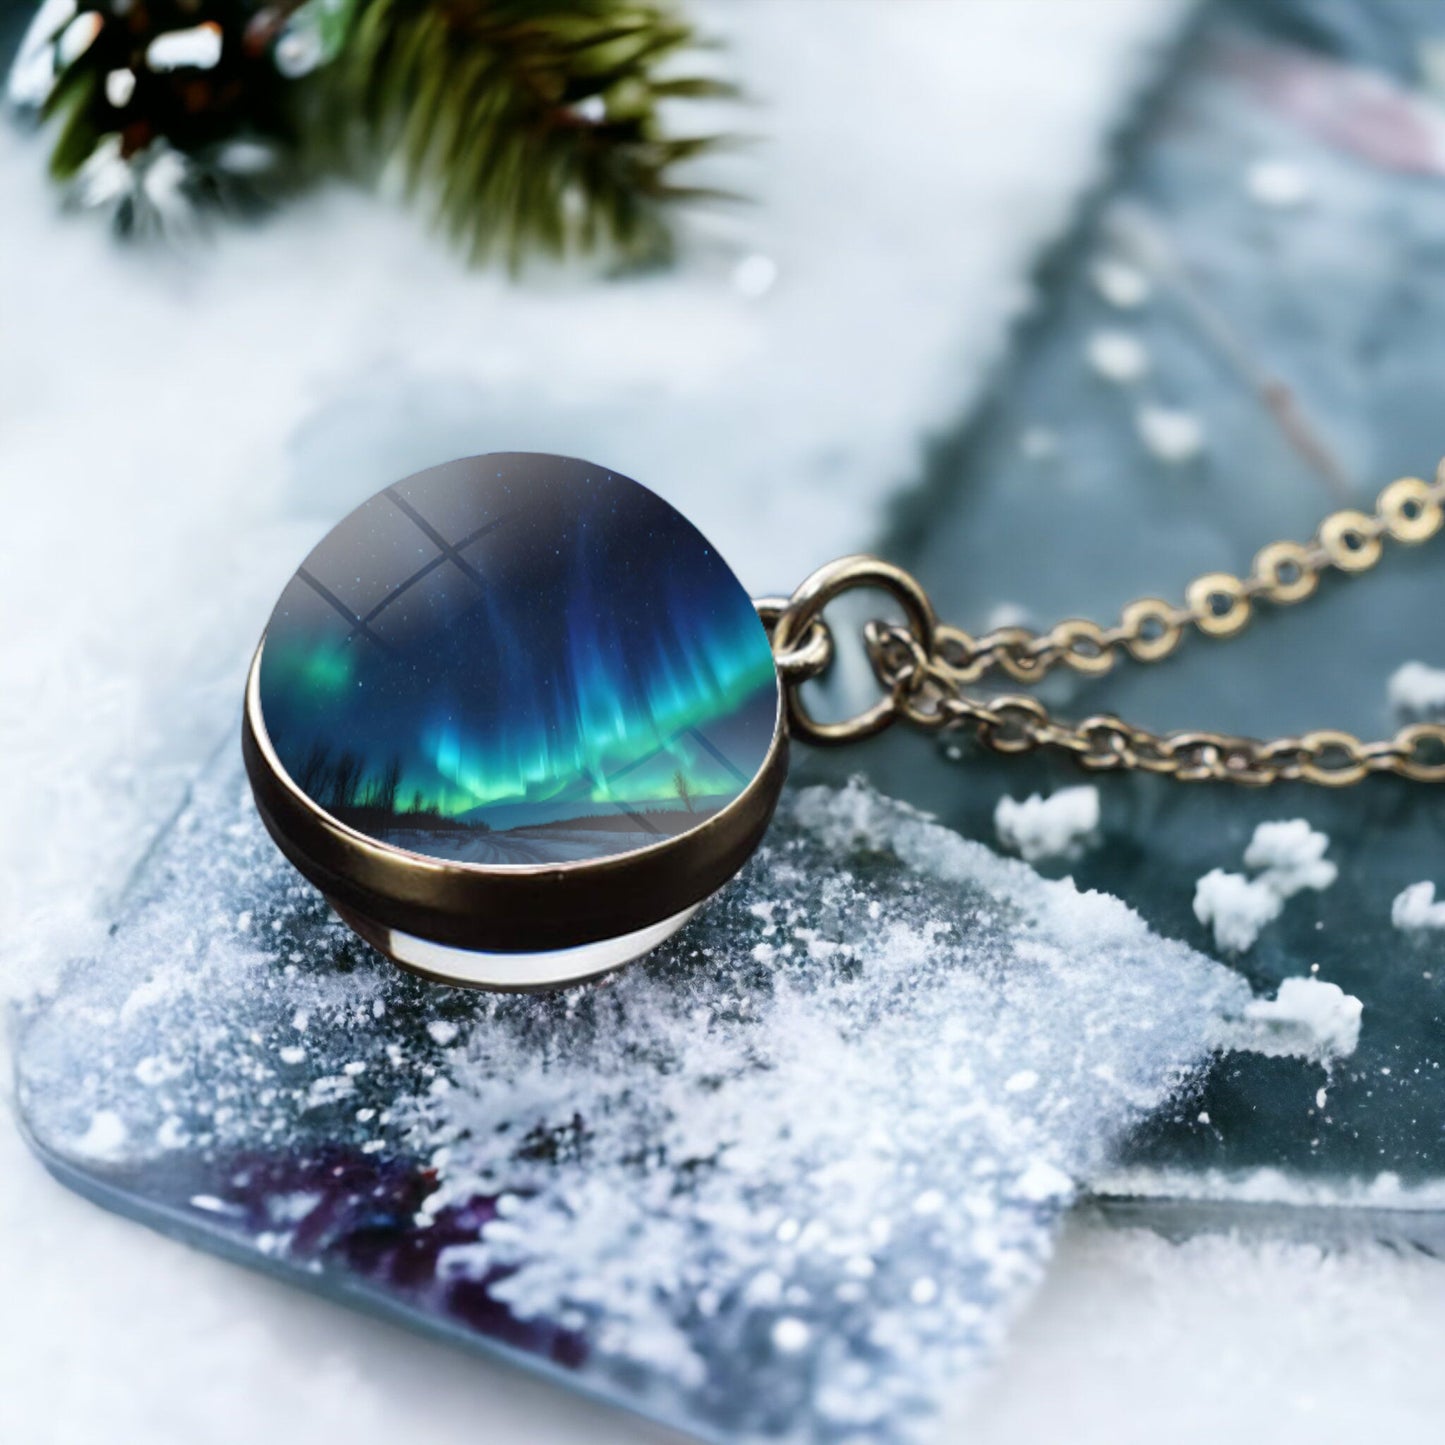 Unique Aurora Borealis Silver Necklace - Northern Light Jewelry - Double Side Glass Ball Pendent Necklace - Perfect Aurora Lovers Gift 31